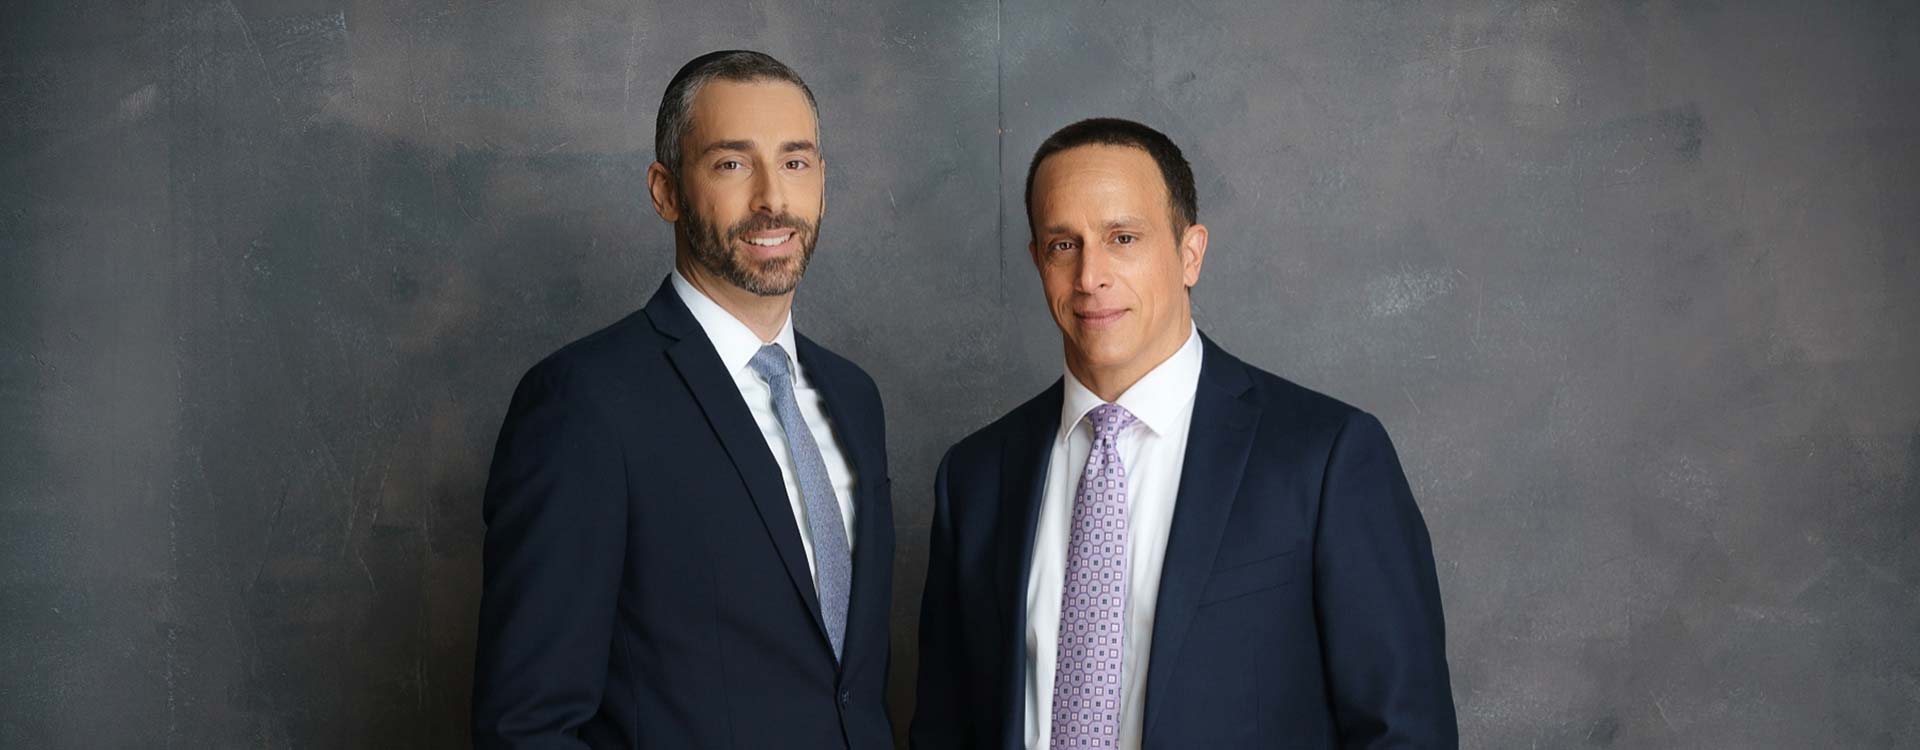 lawyers Joshua L. Kopple and Michael S. Kopple standing in front of a grey wall